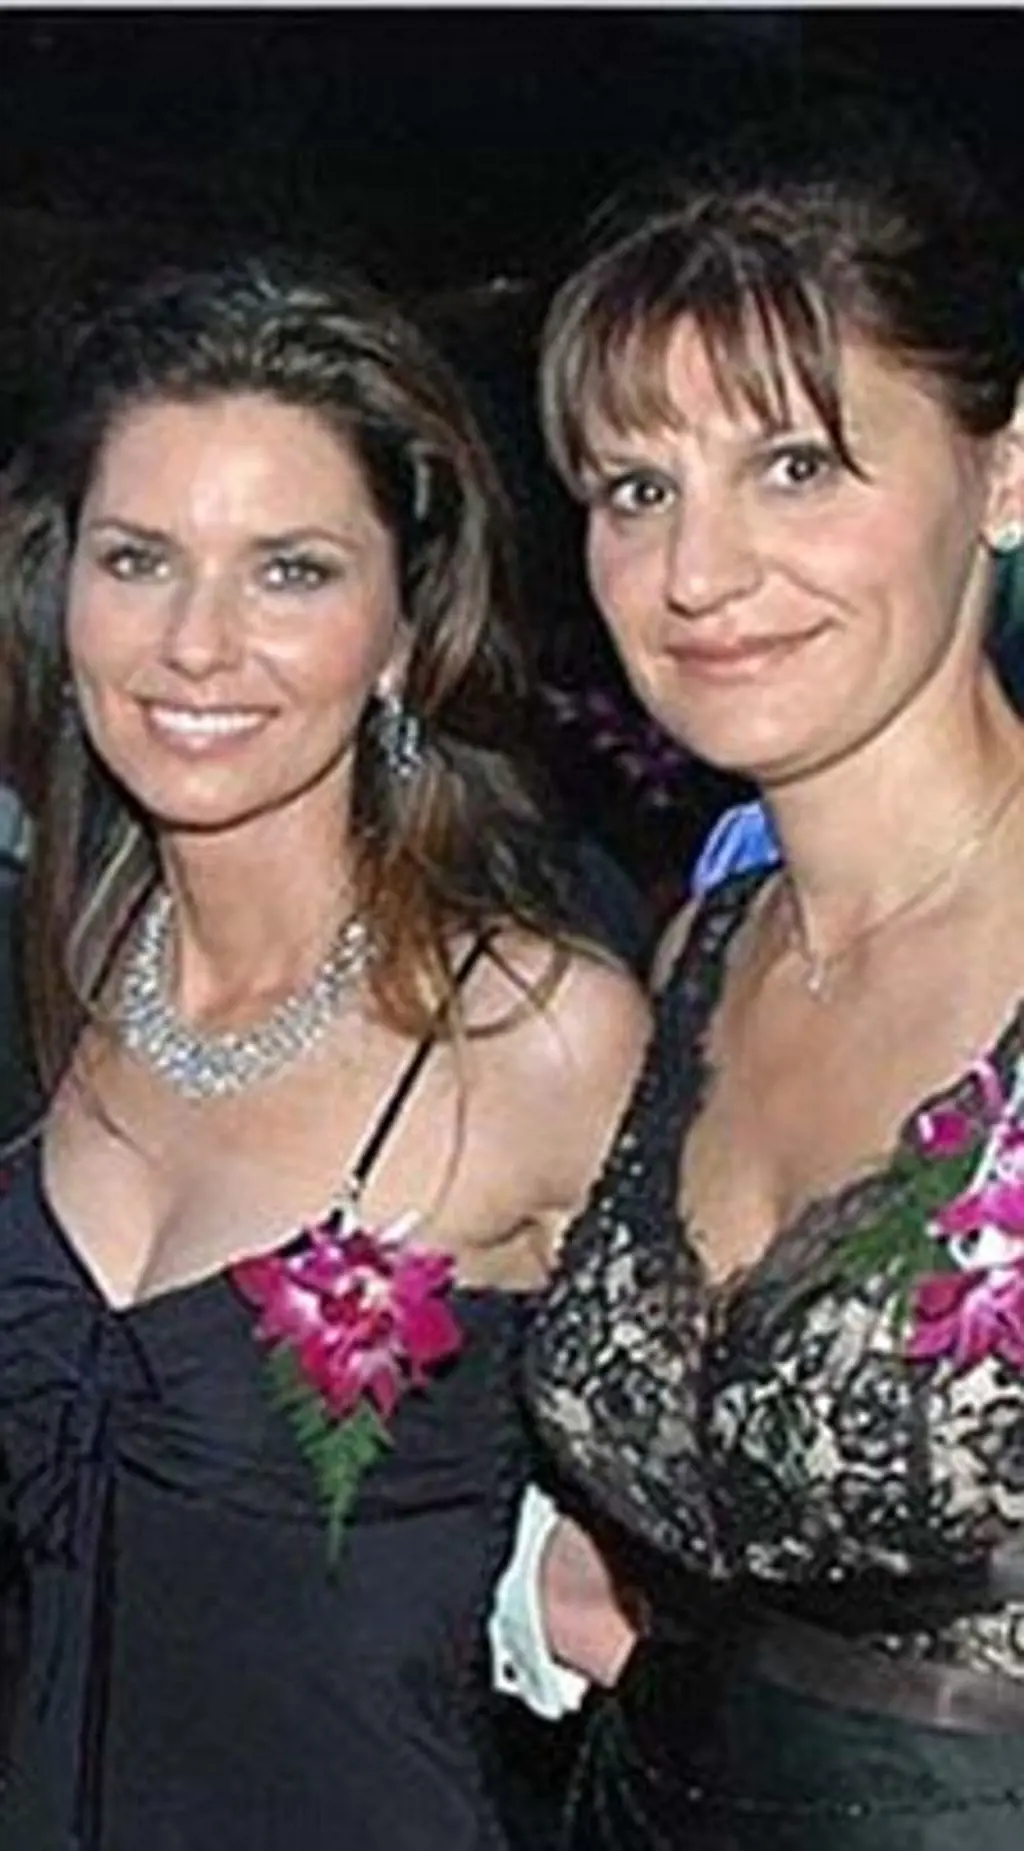 Marie Anne served as a Swiss assistant to Shania Twain 